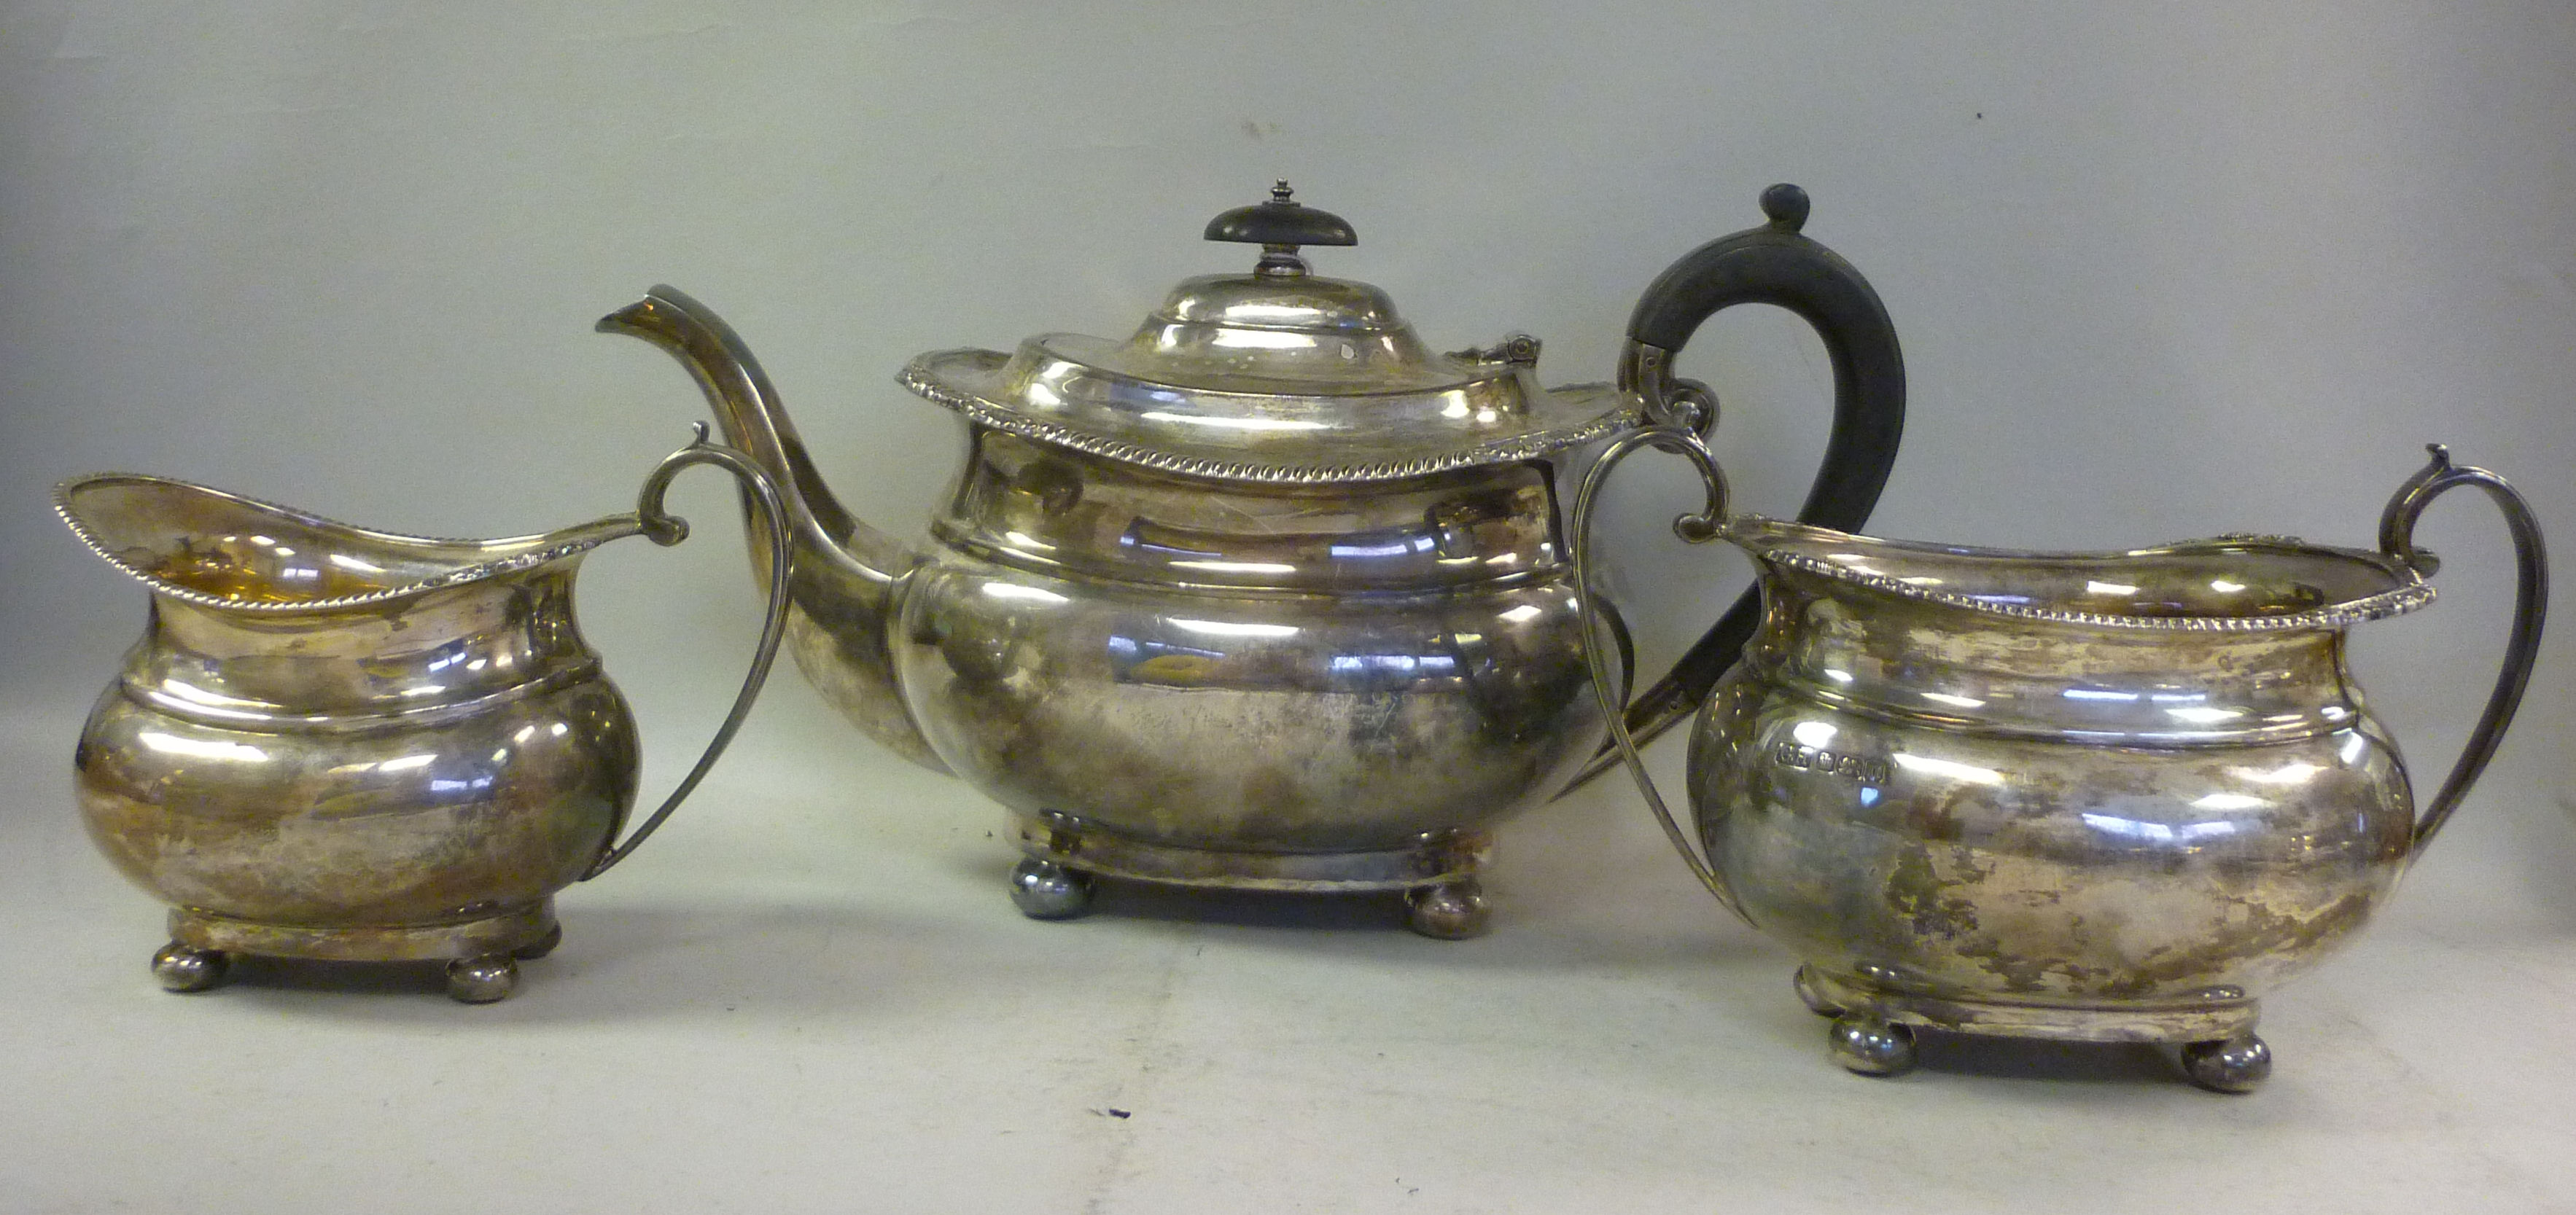 An Edwardian three piece silver tea set of oval, ogee form with flared, gadrooned and shell cast